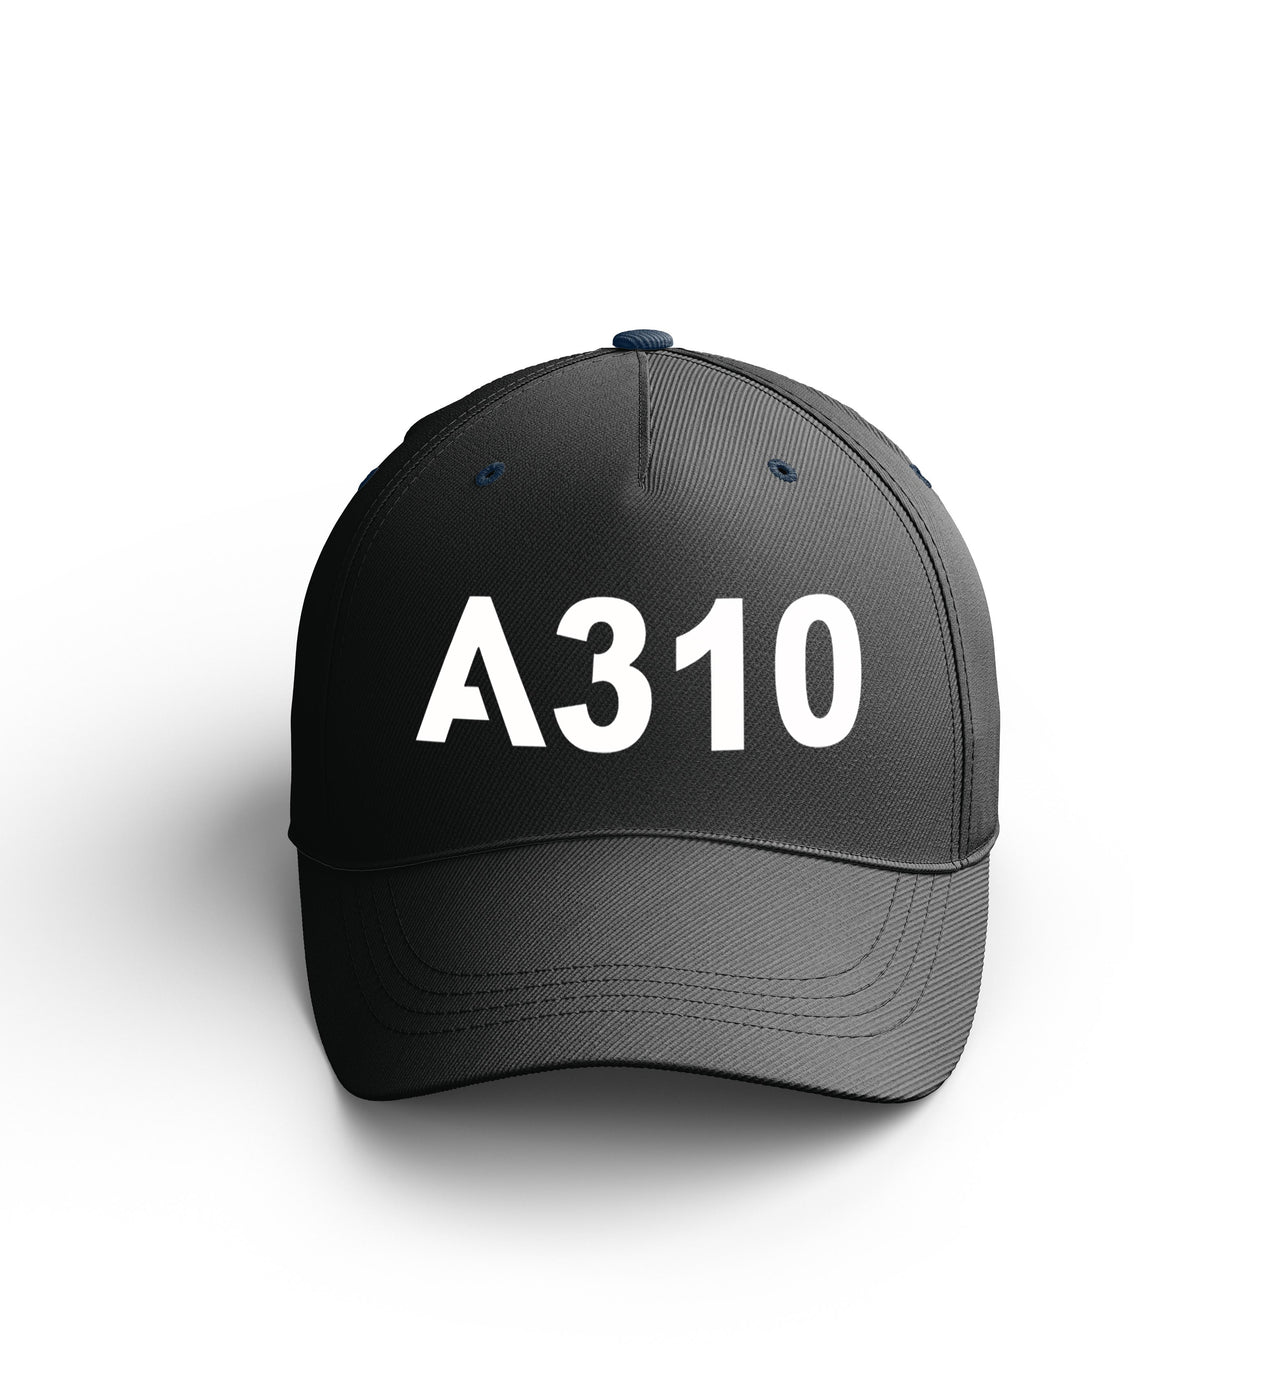 Customizable Name & A310 Flat Text Embroidered Hats